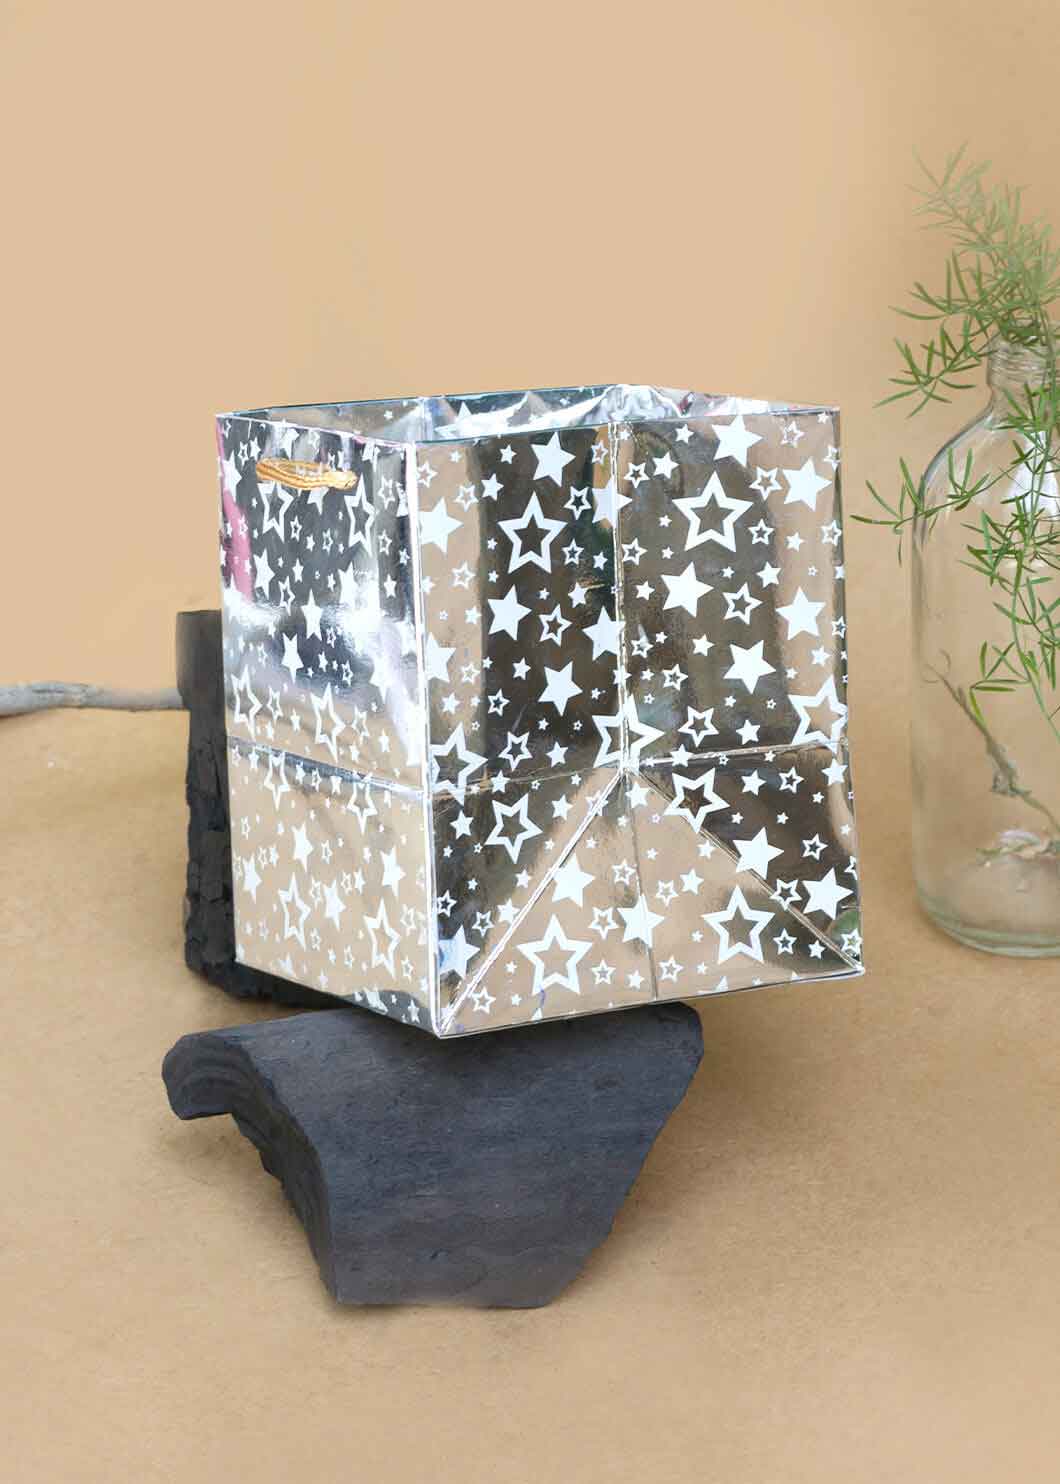 Silver Shiny Paper Bag - Star Pattern Design Silver Laminated Paper Bag for Packaging